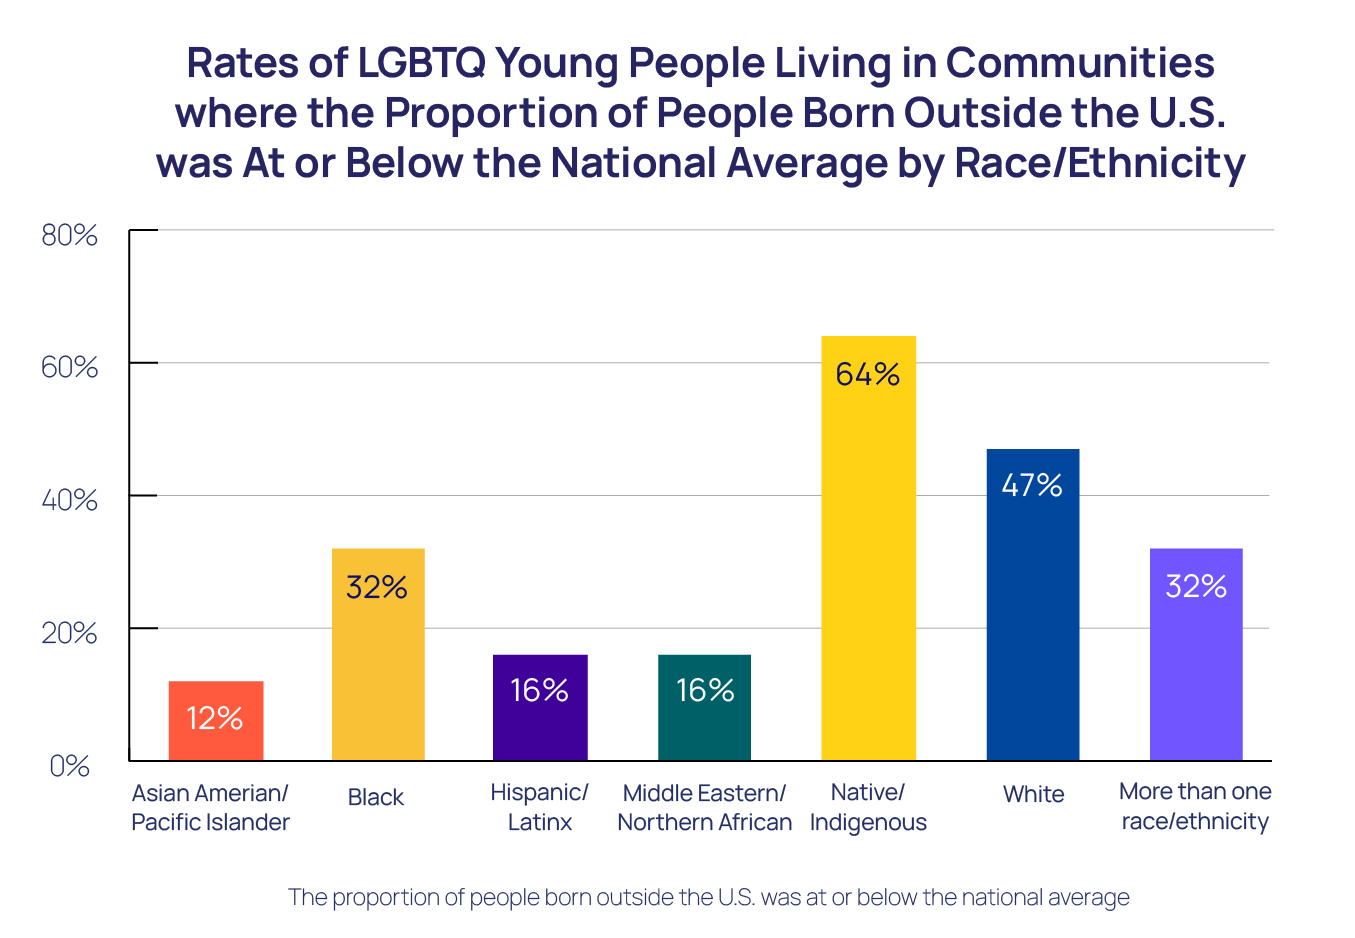 Rates of LGBTQ Young People Living in Communities where the Proportion of People Born Outside the U.S. was At or Below the National Average by Race/Ethnicity Bar Chart